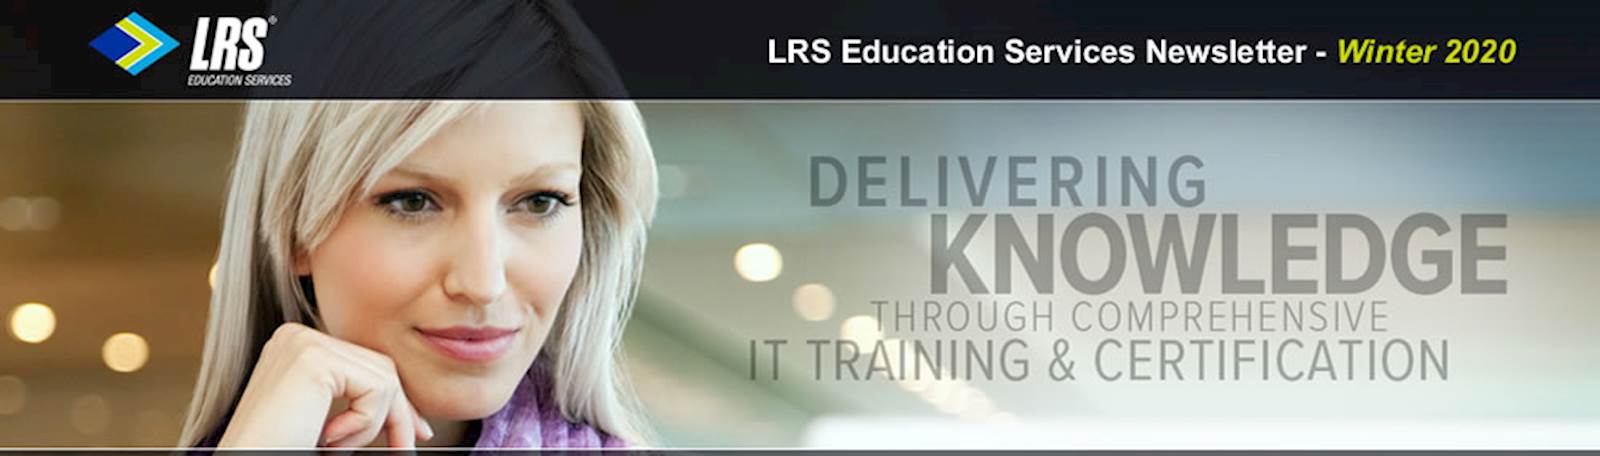 LRS Education Services home